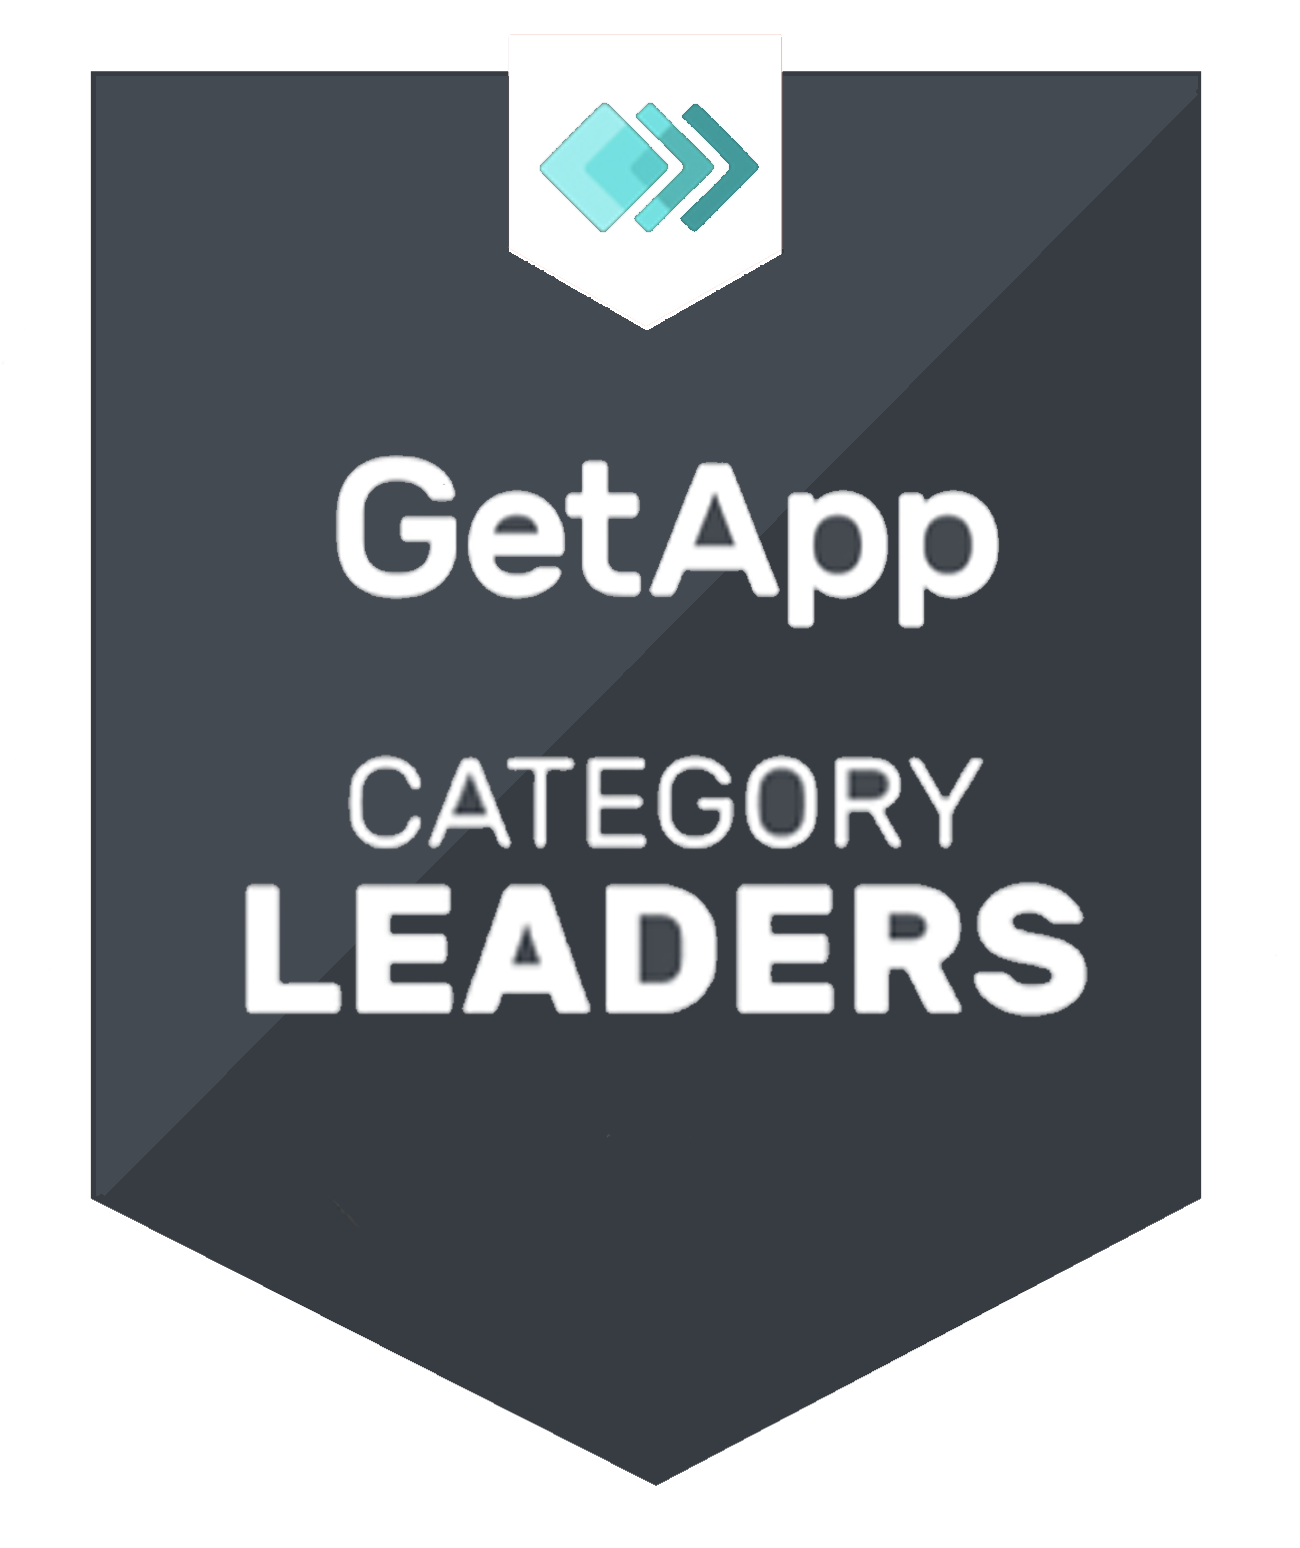 Complete CRM is a leader in Marketing Automation on Get App